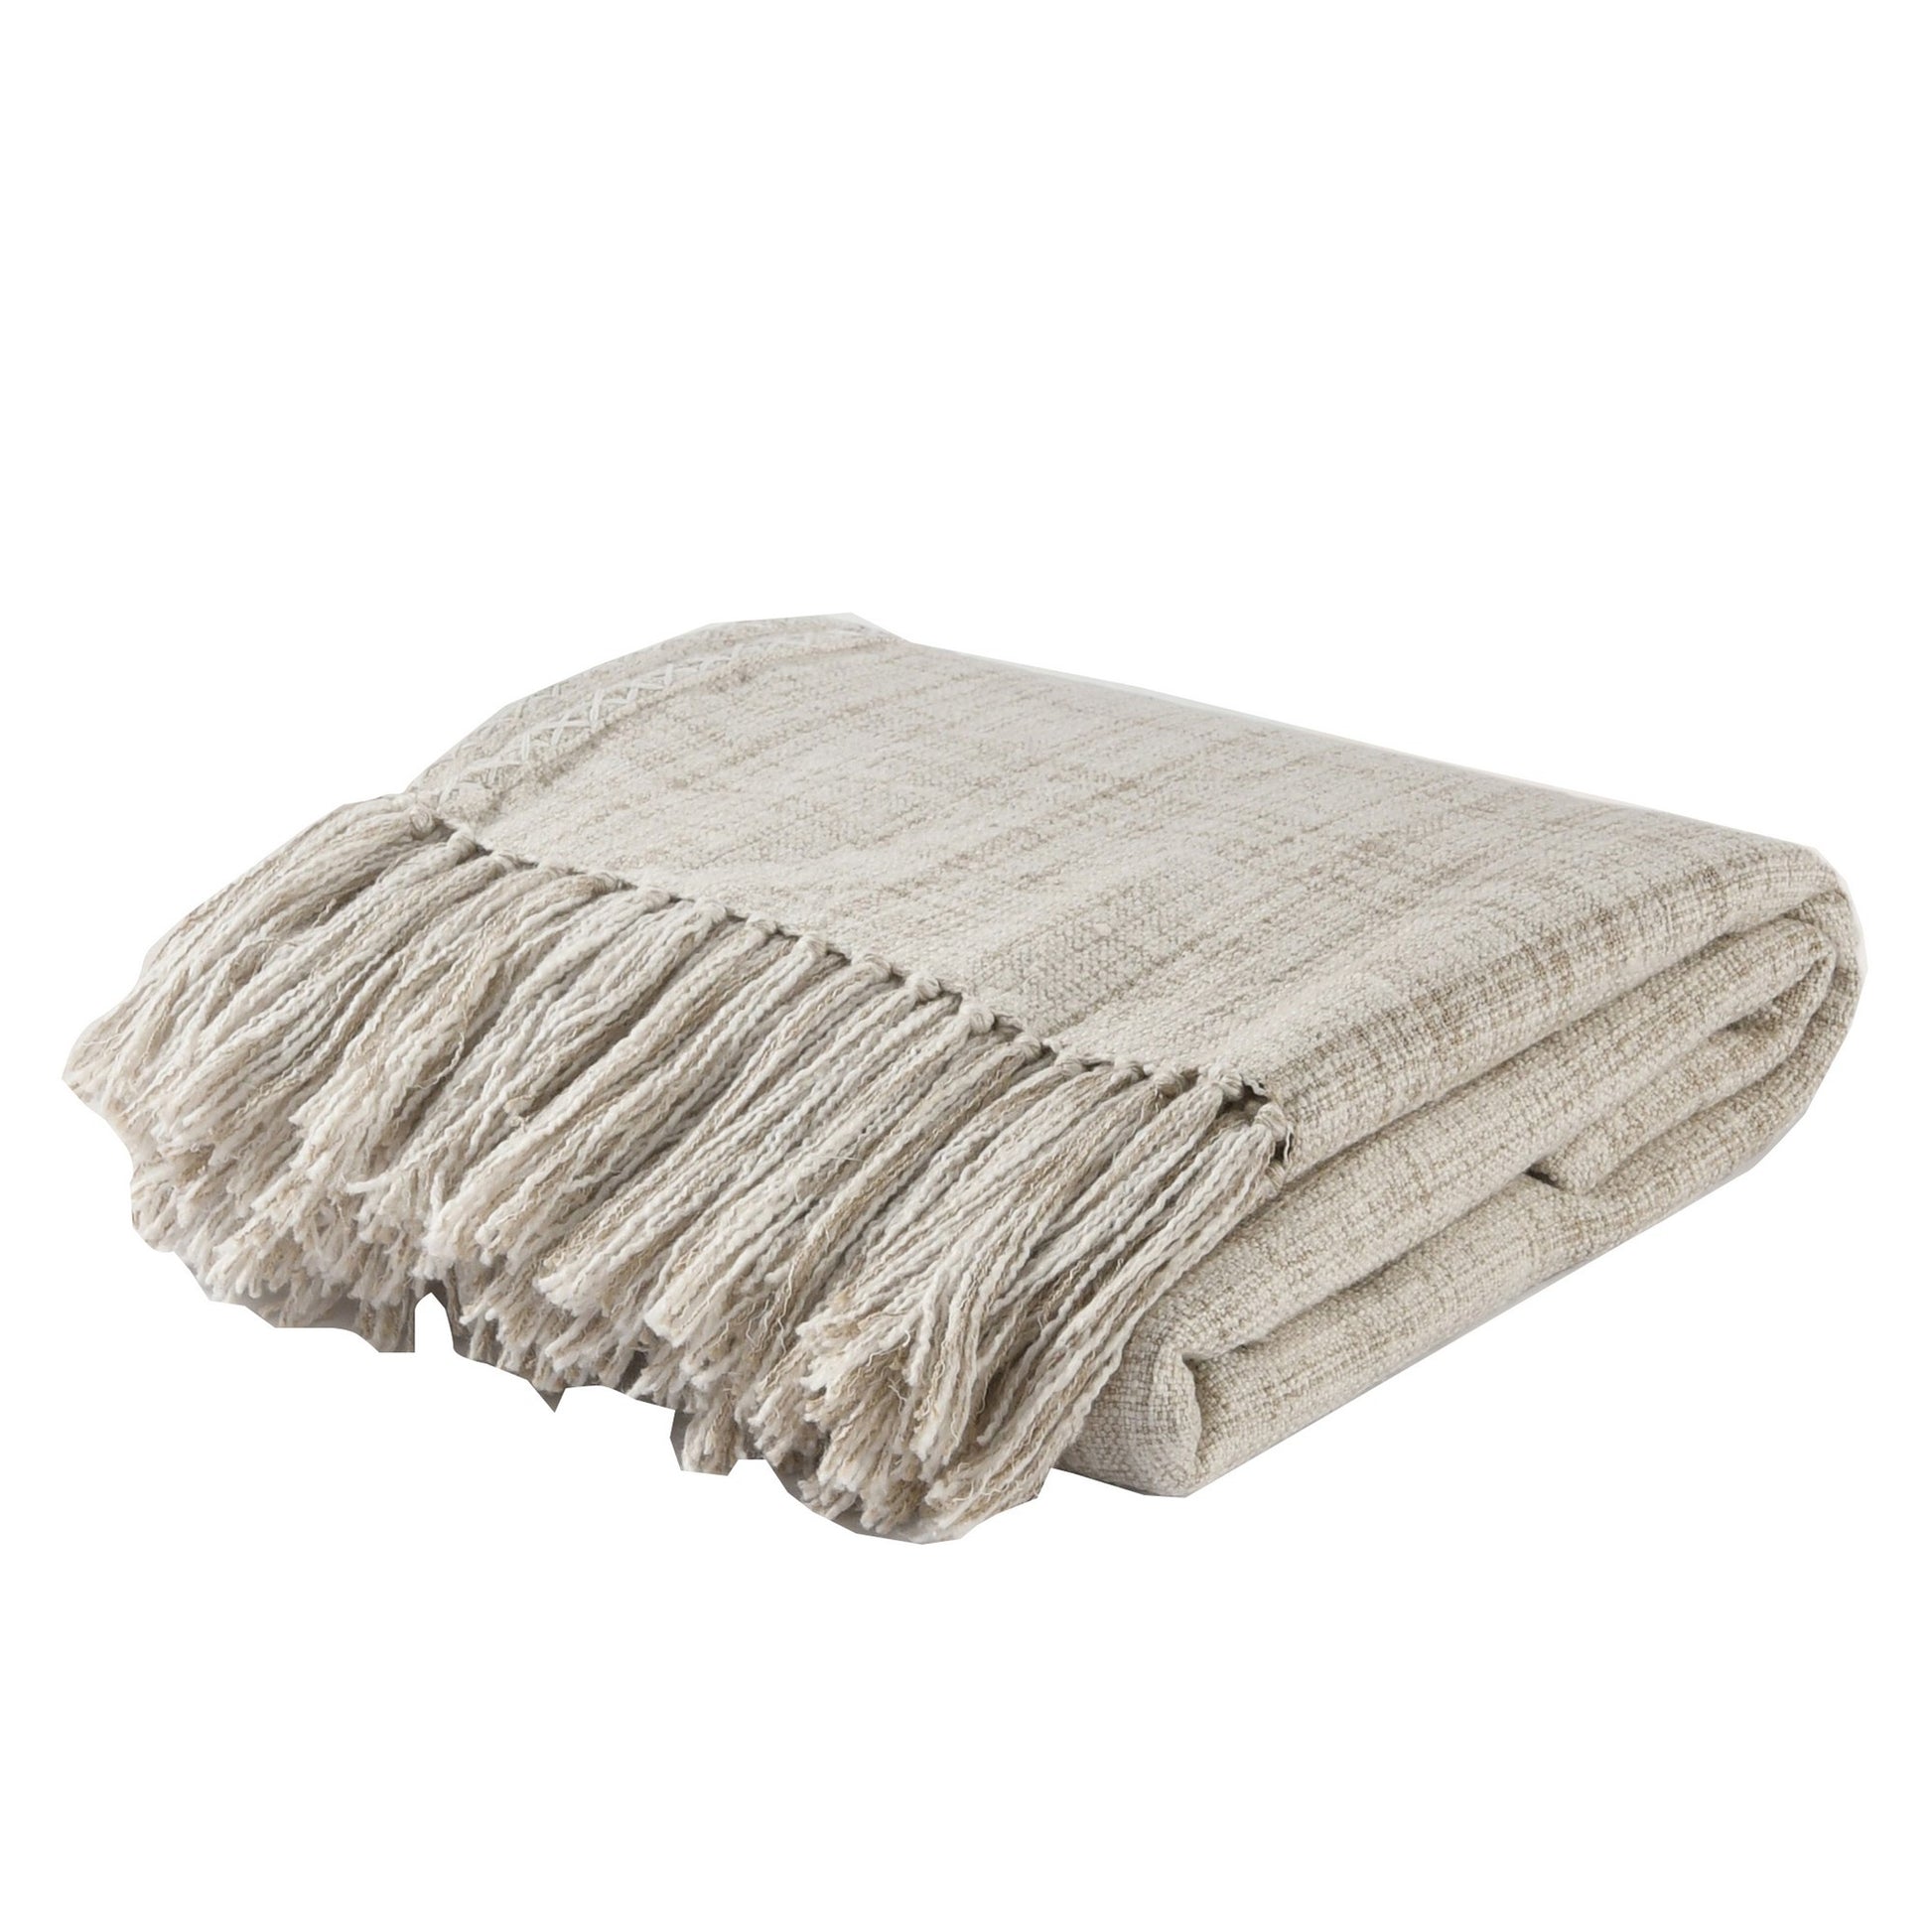 Fabric Throw Blanket with Woven Ends and Fringes,